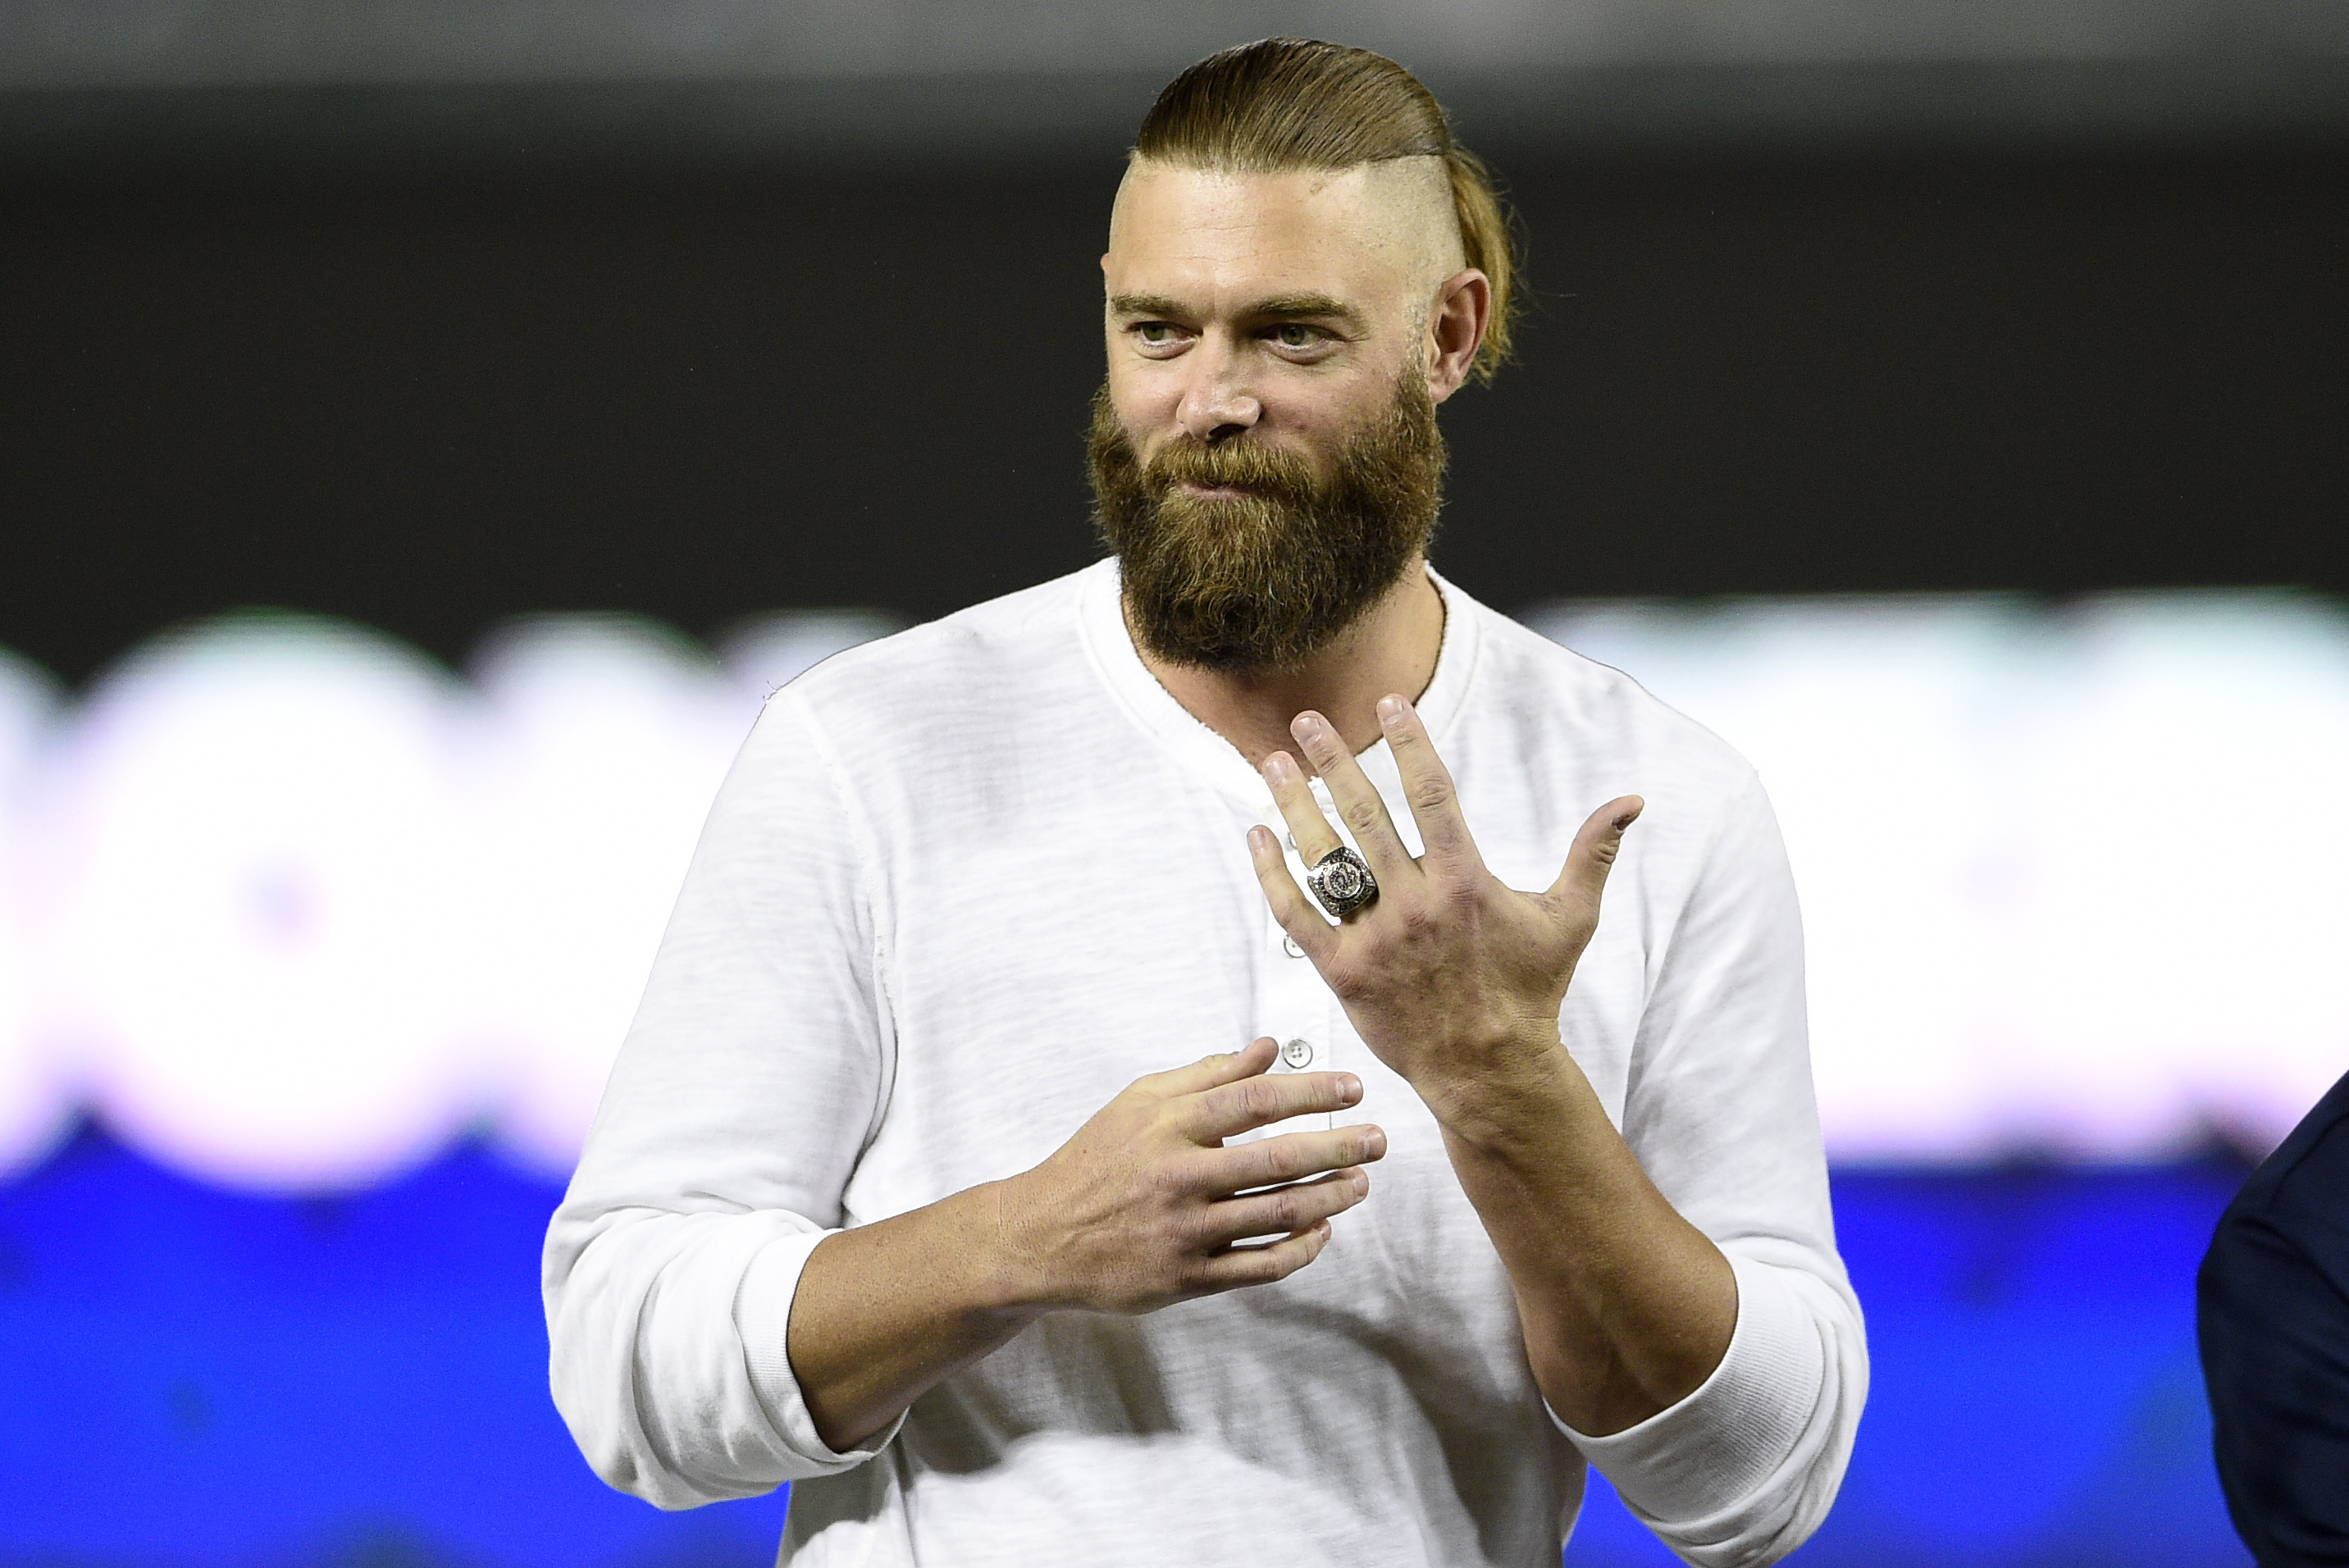 TMZ: Jayson Werth Says 'I'm Not Sure I Trust Cops' on Video During Arrest, News, Scores, Highlights, Stats, and Rumors